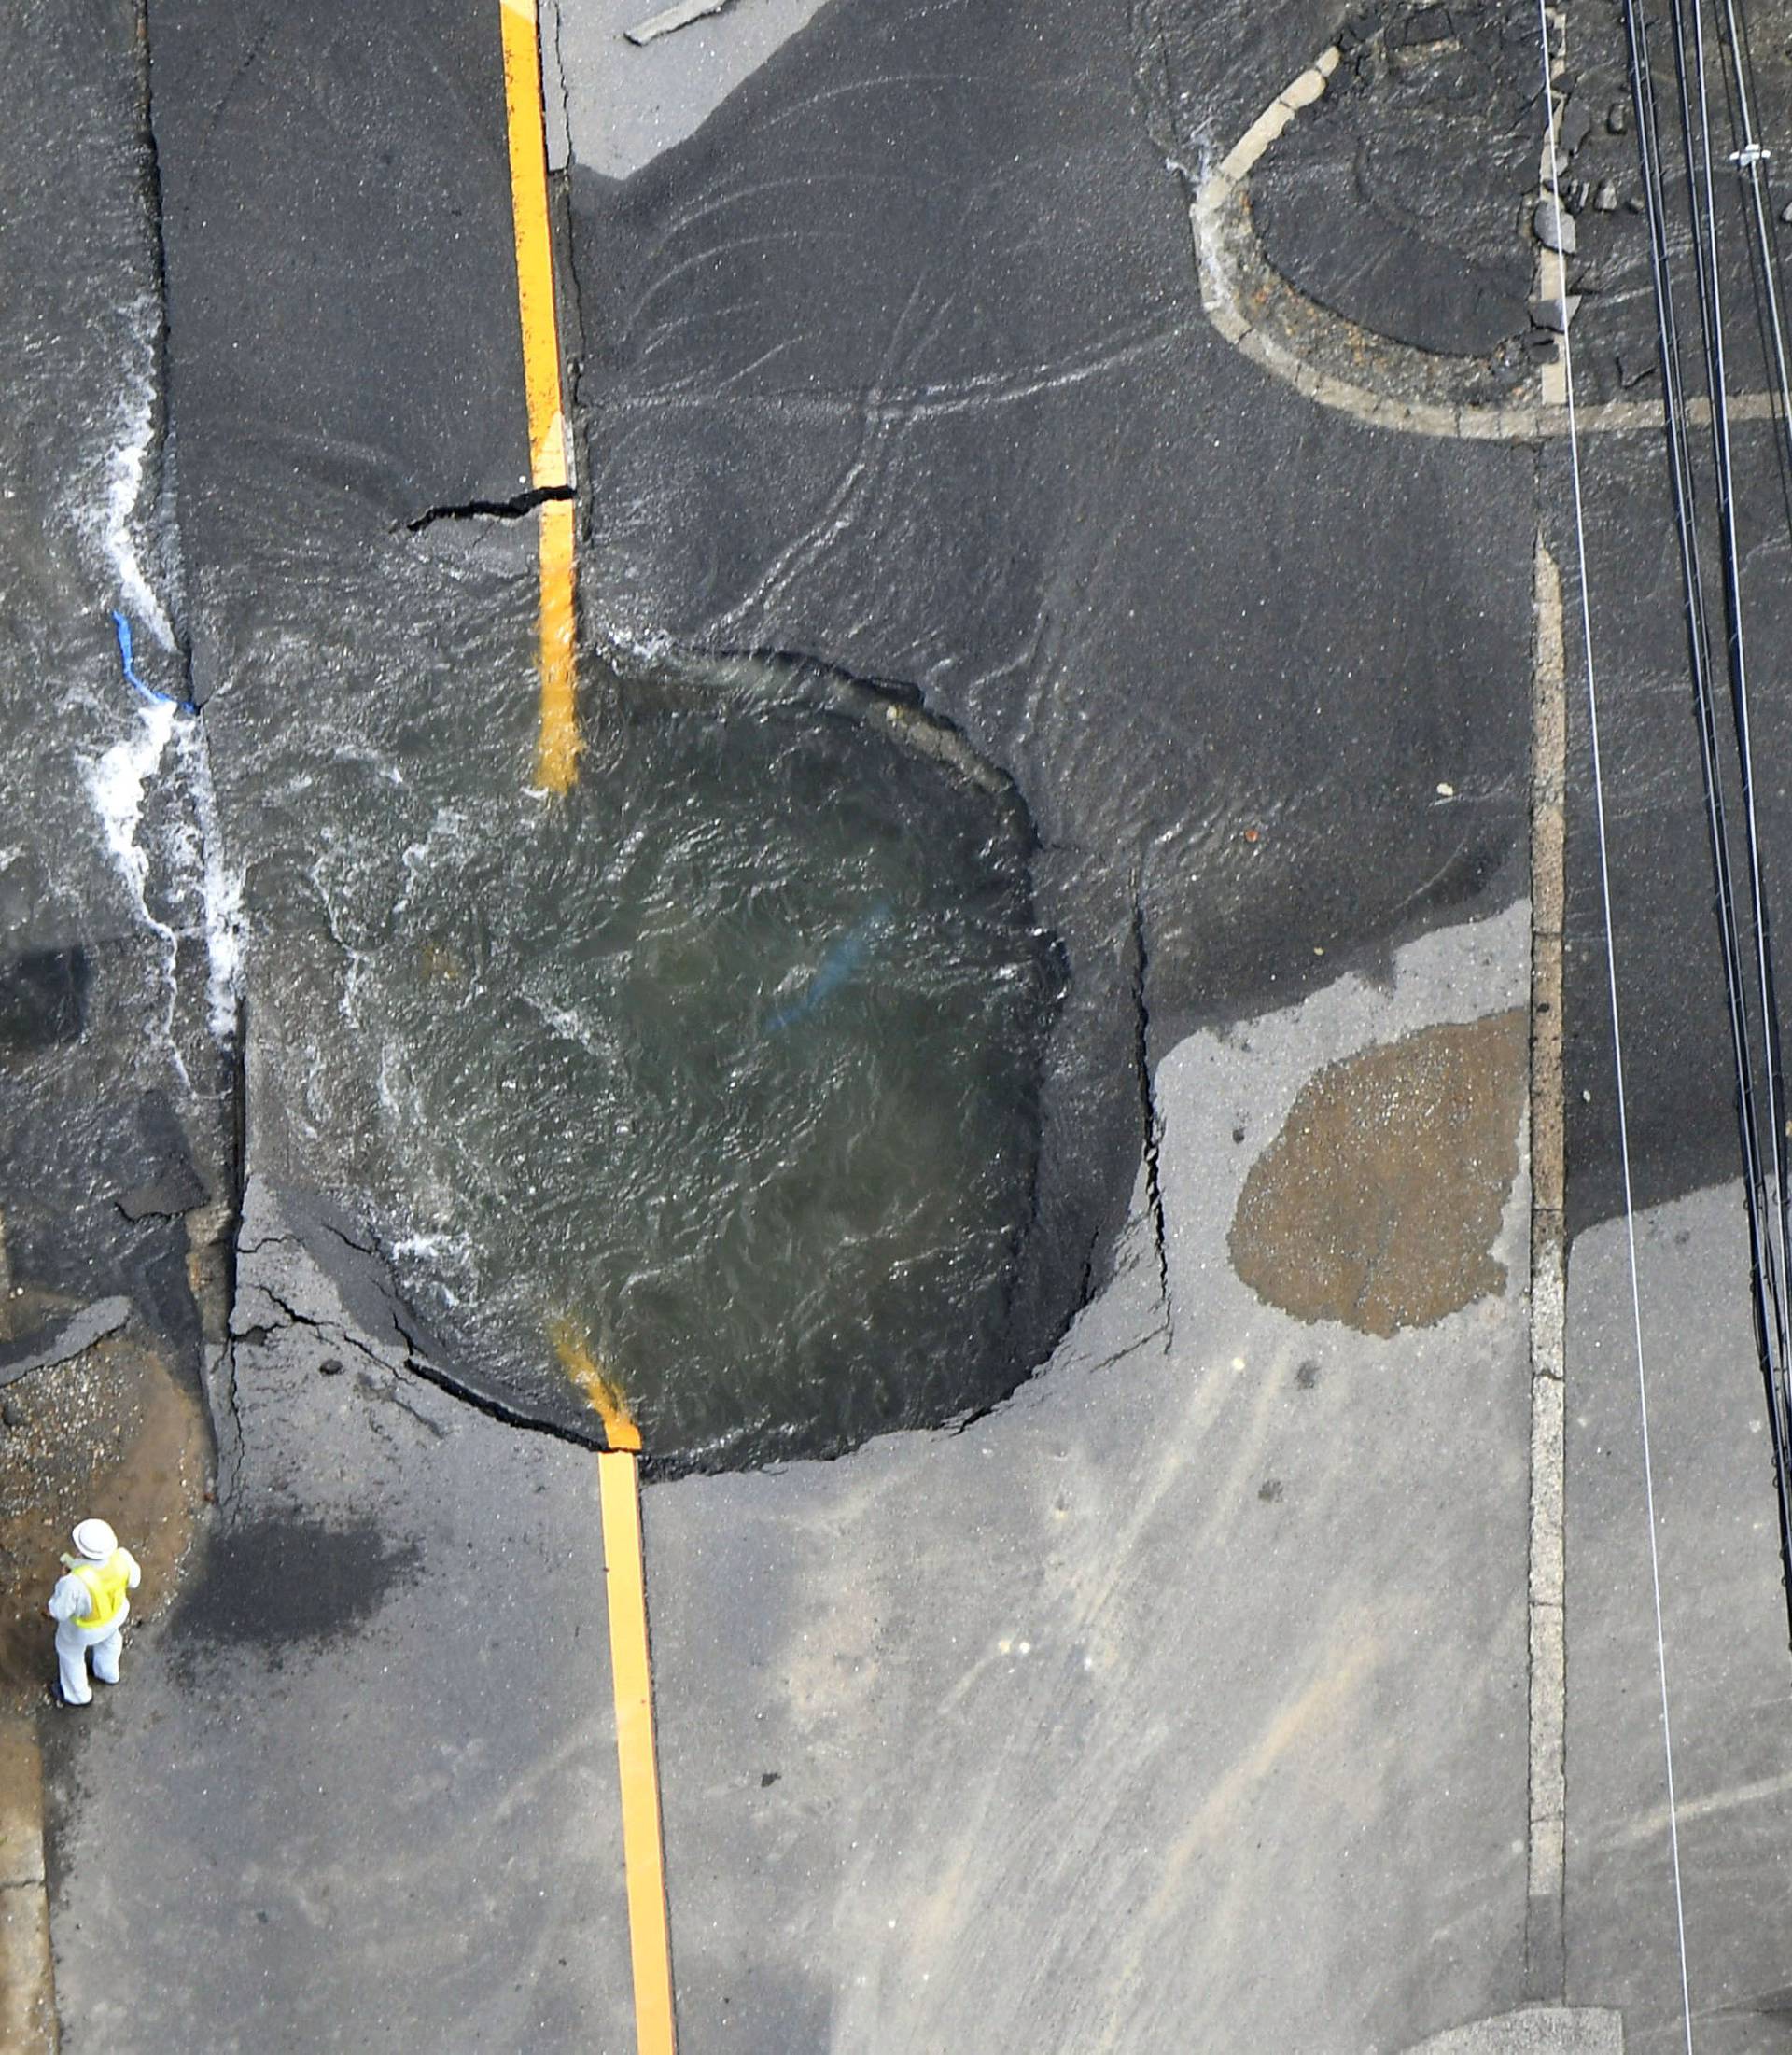 Water flows out from cracks in a road damaged by an earthquake in Takatsuki